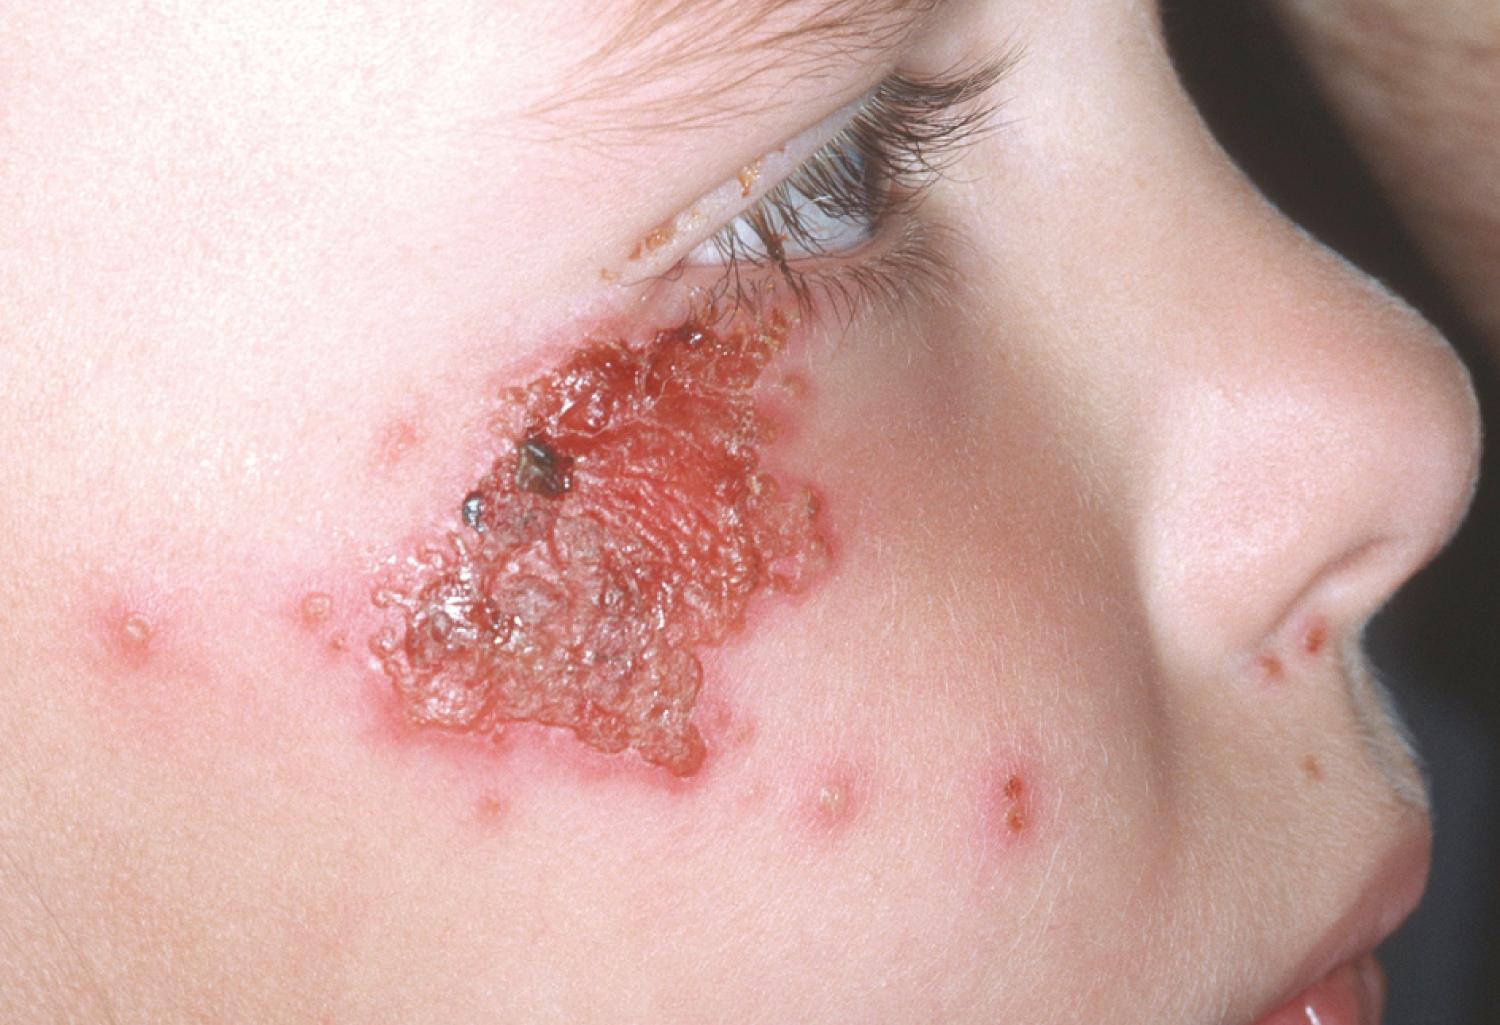 FIGURE 69.2, A young girl hospitalized for febrile pneumonia had reactivation of herpes simplex virus 1 in a dermatomal distribution on her face.